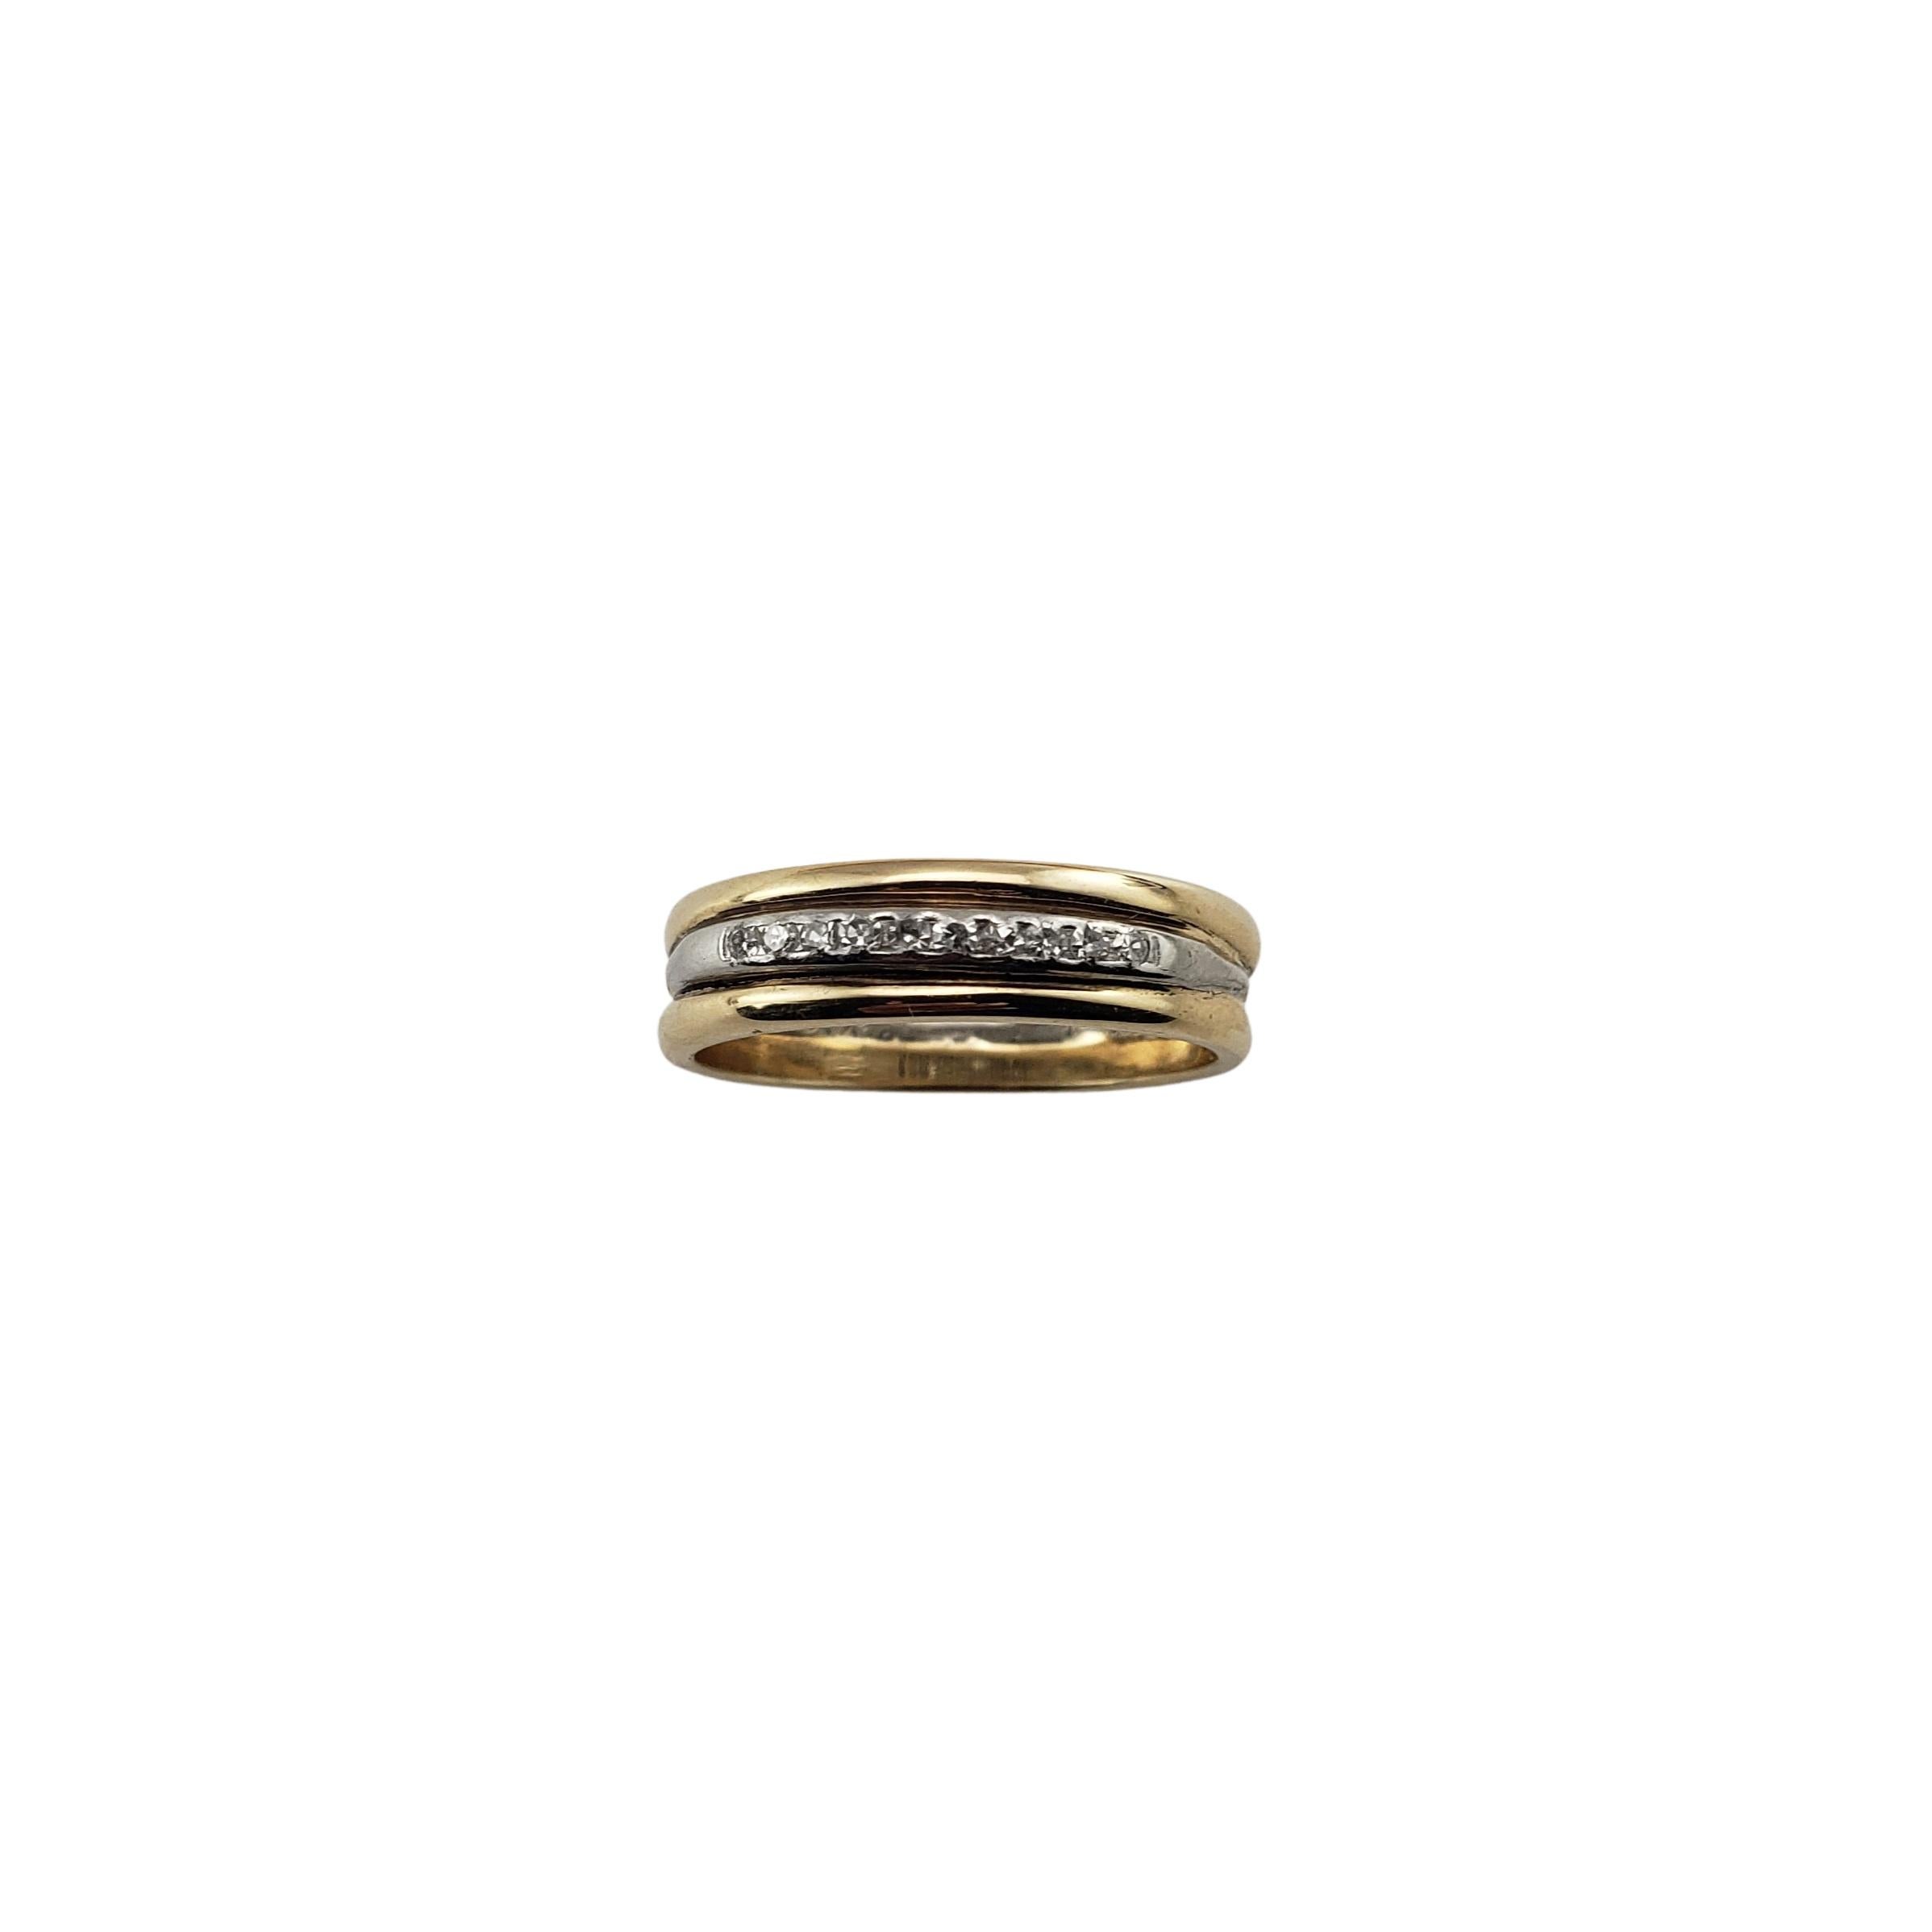 14 Karat Yellow Gold and Platinum and Diamond Band Ring Size 7.5-

This lovely band features ten round single cut diamonds set in beautifully detailed 14K yellow gold and platinum.  Width:  5 mm.
Center band is circa early 1900's; two yellow bands